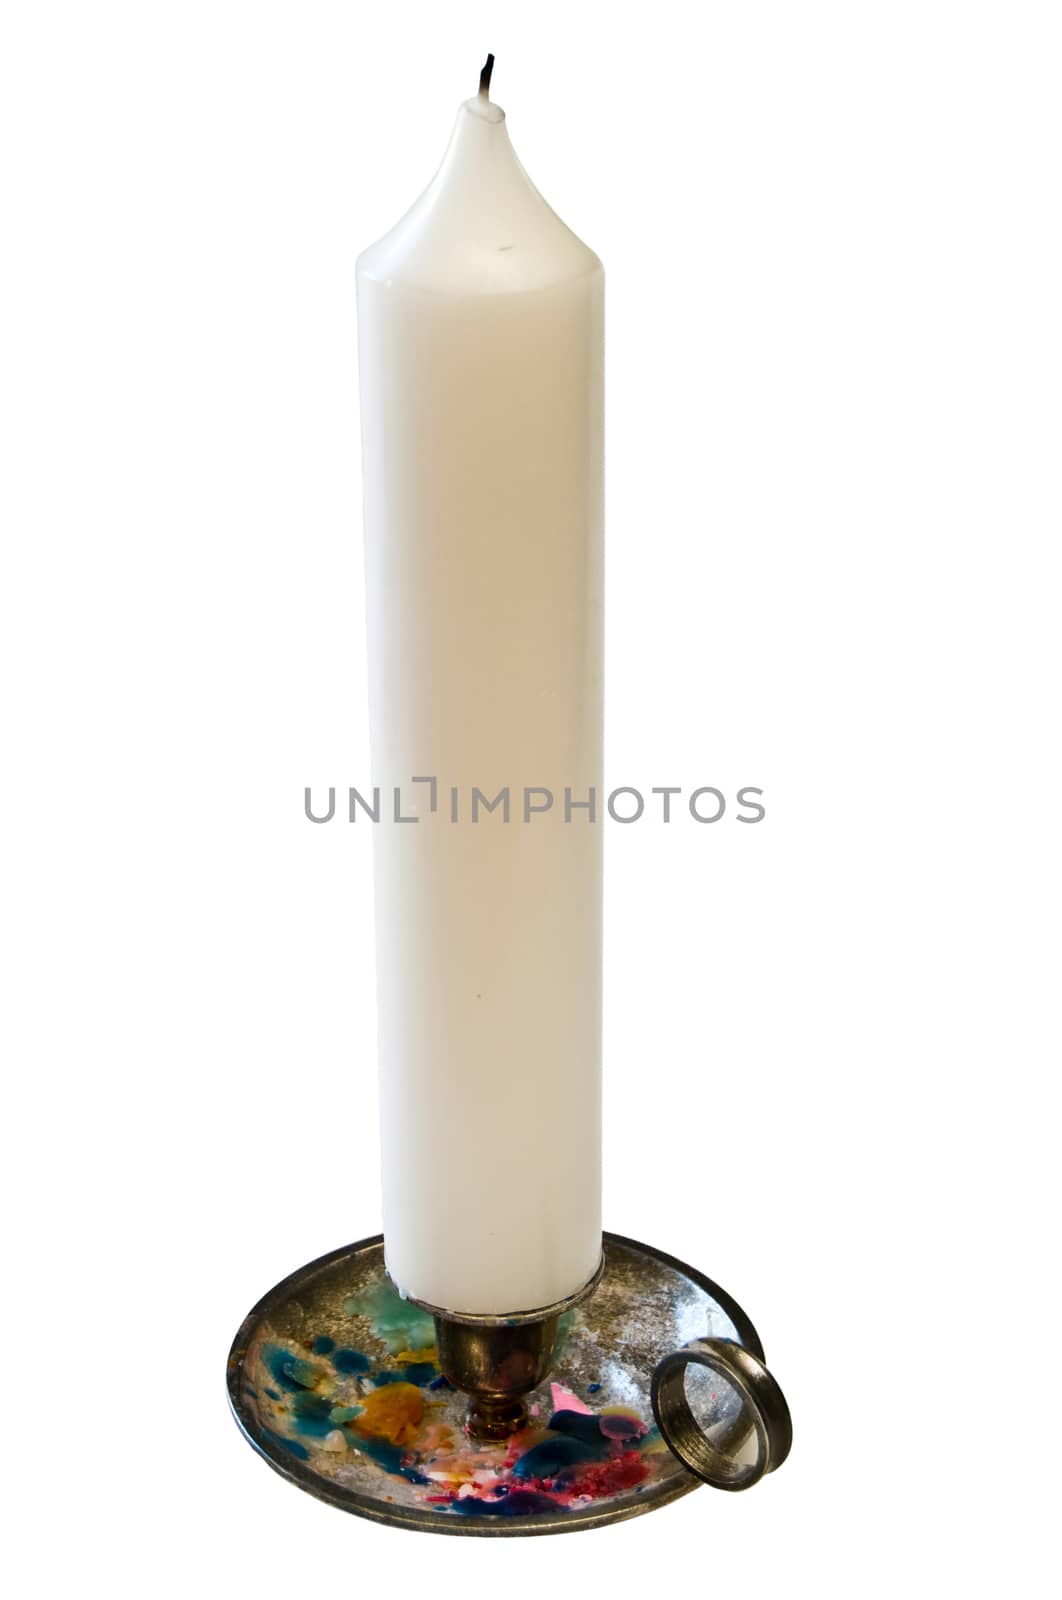 A candle ready for emergency darkness